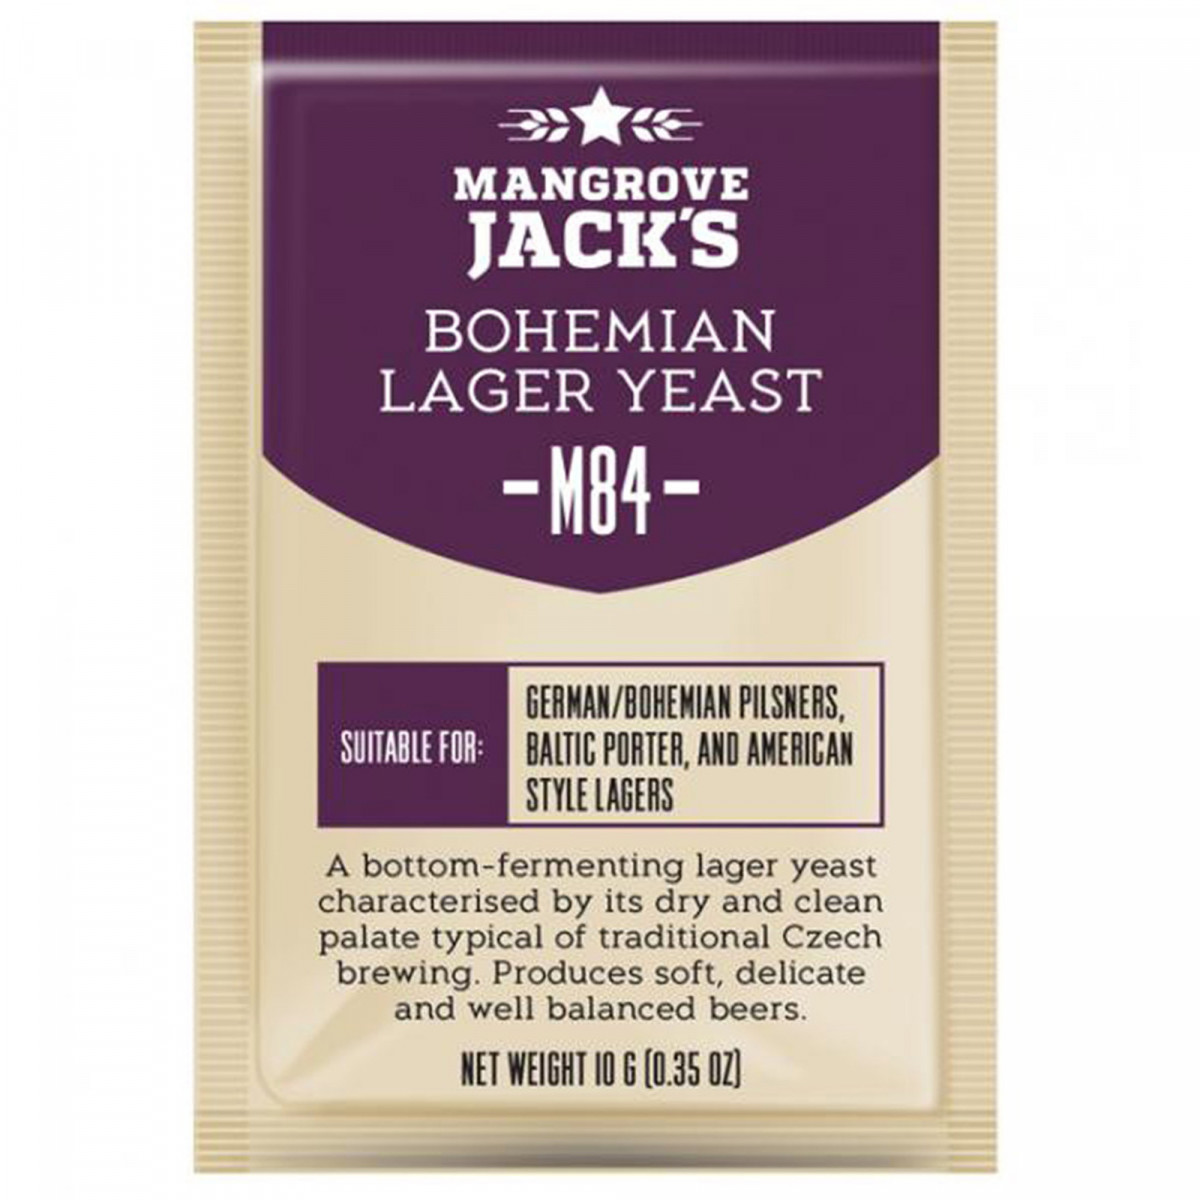 Dried brewing yeast Bohemian Lager M84 - 10 g - Mangrove Jack's Craft Series